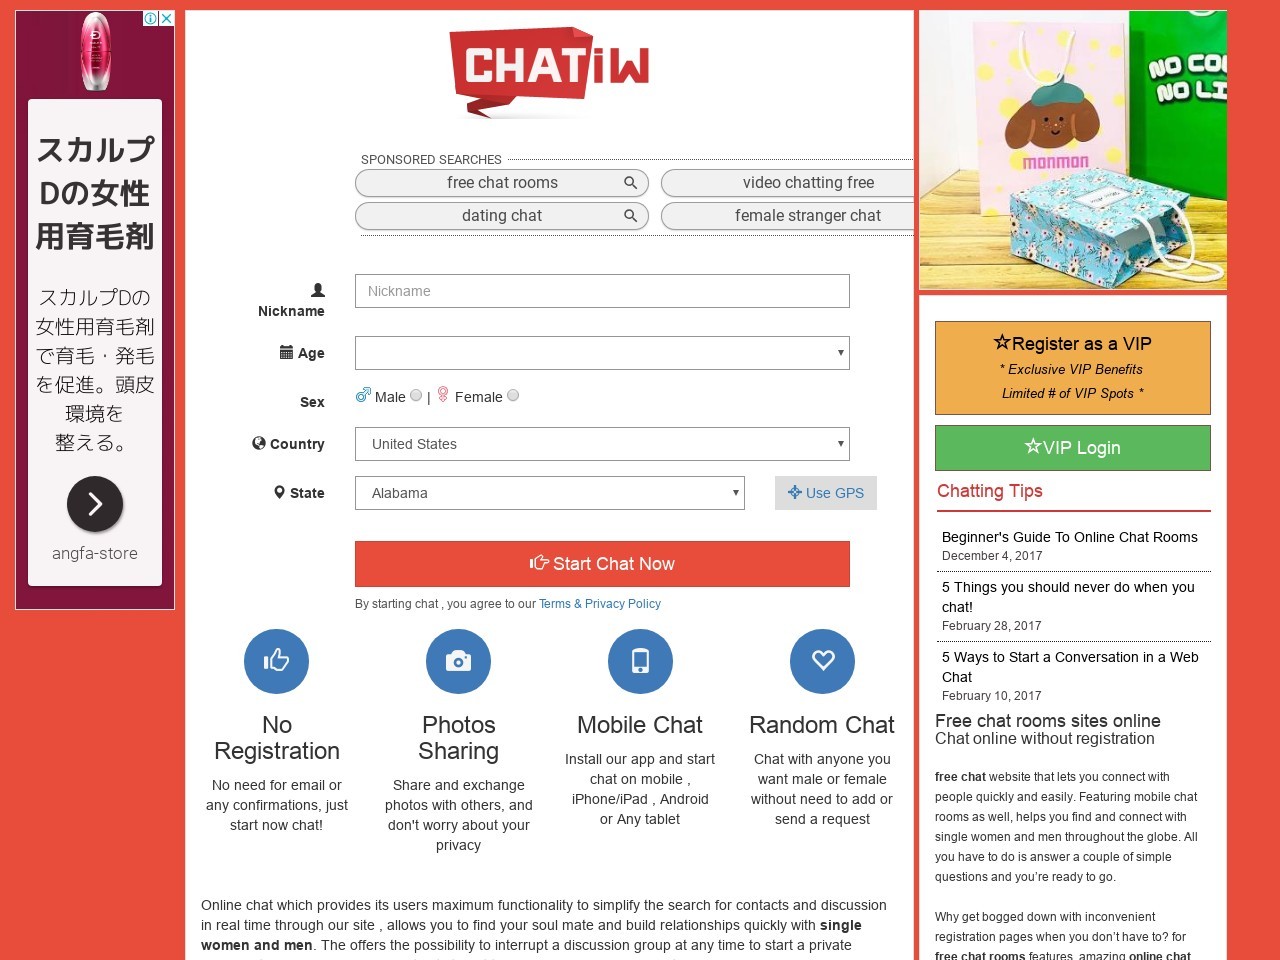 Dating site chatiw fr)